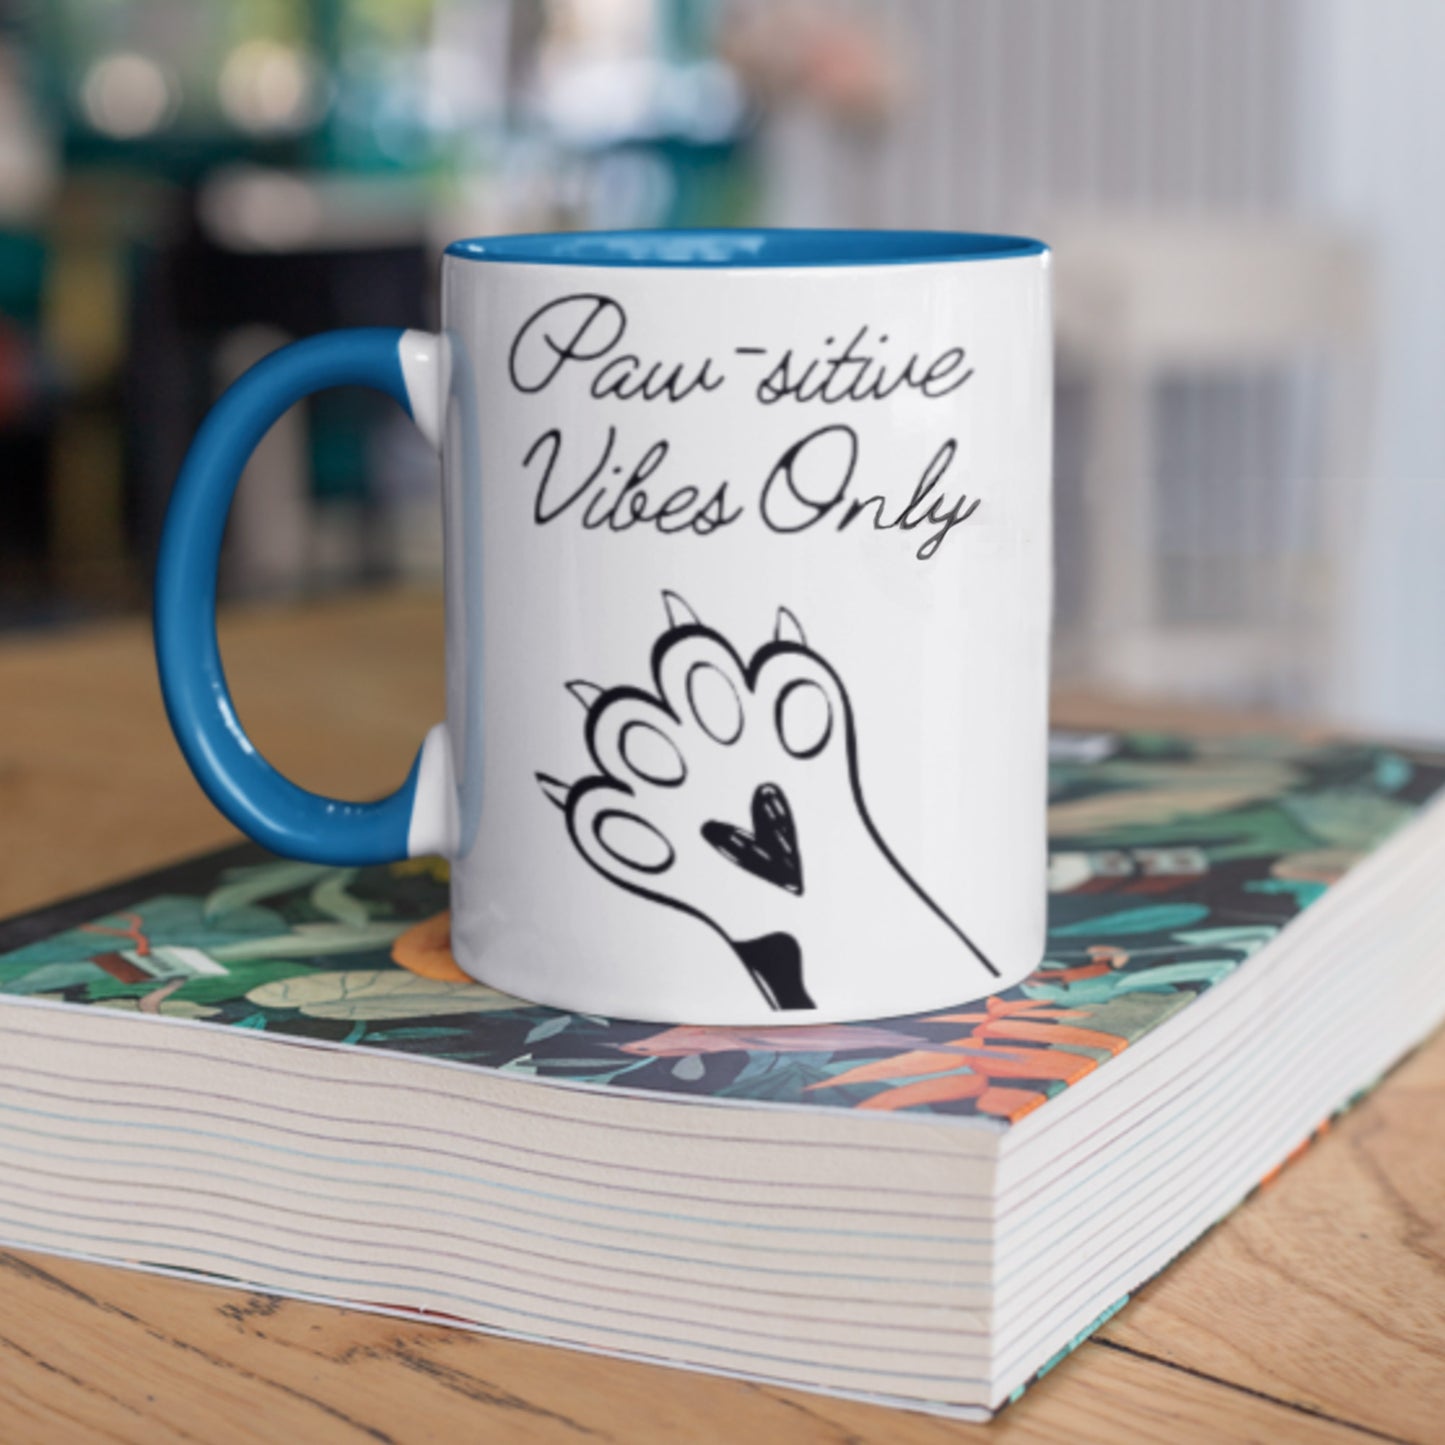 Paw-sitive Vibes Only Mug blue handle